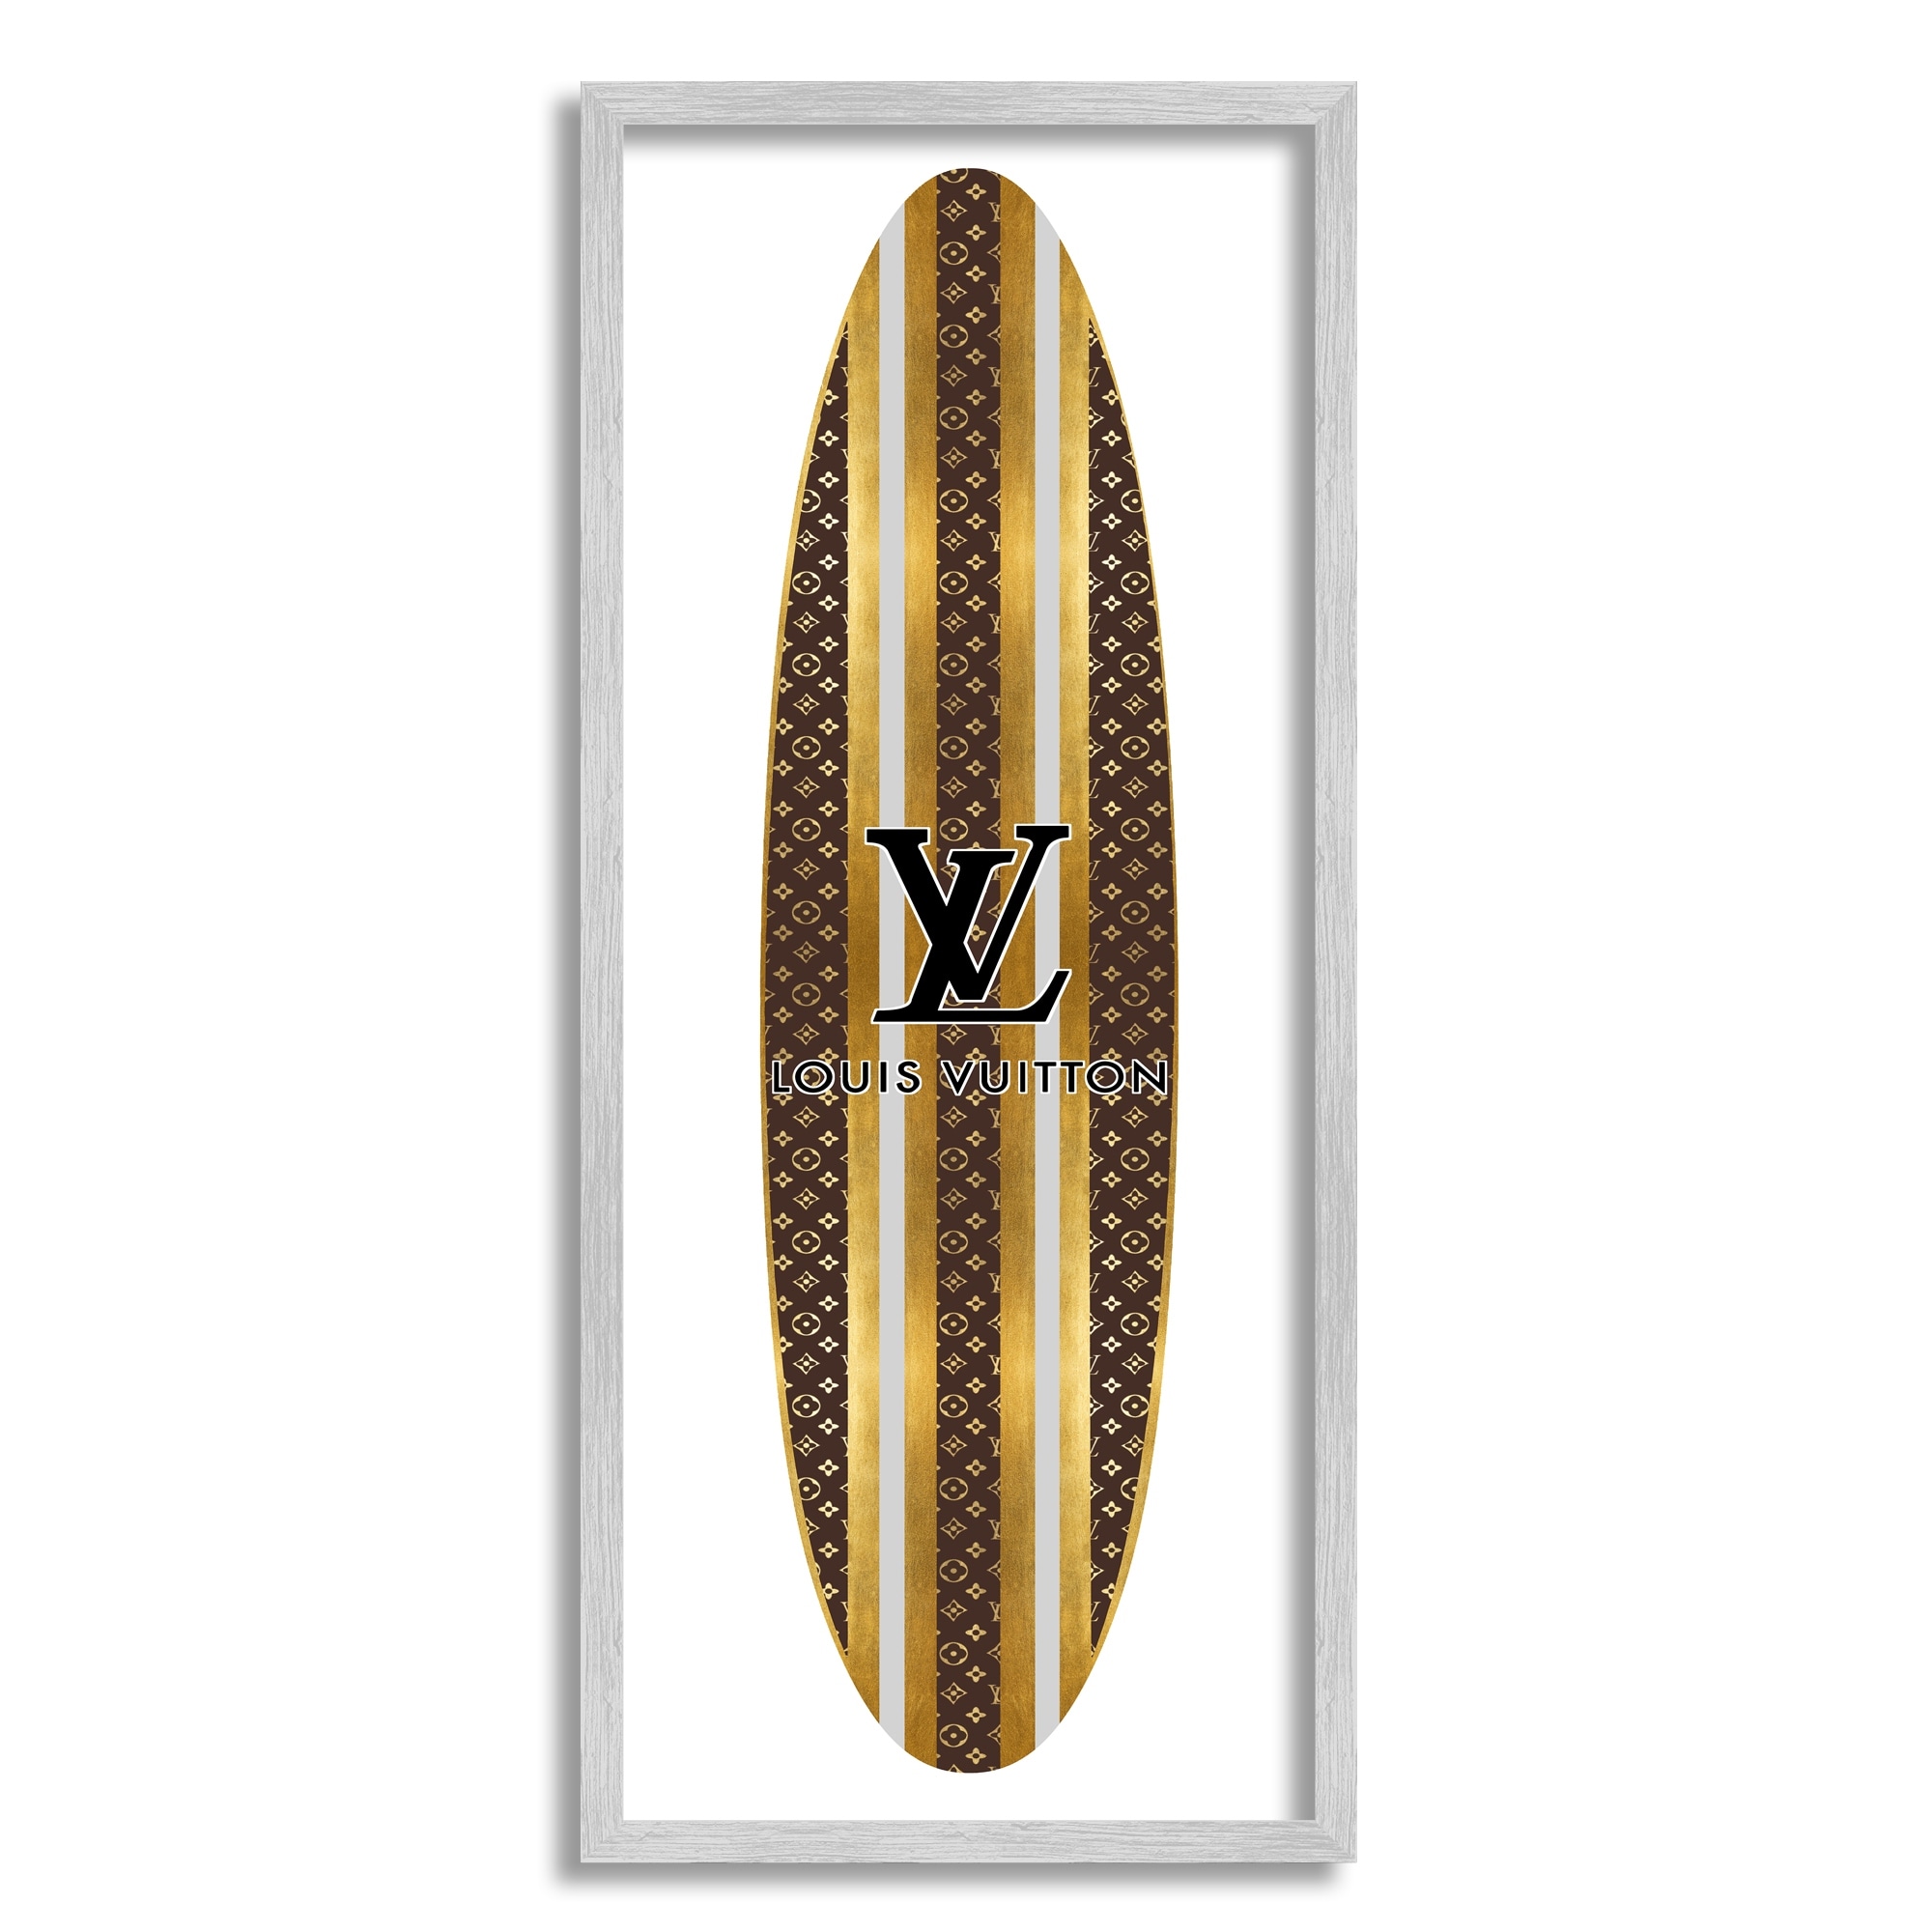 Louis French Plastic Surfboard